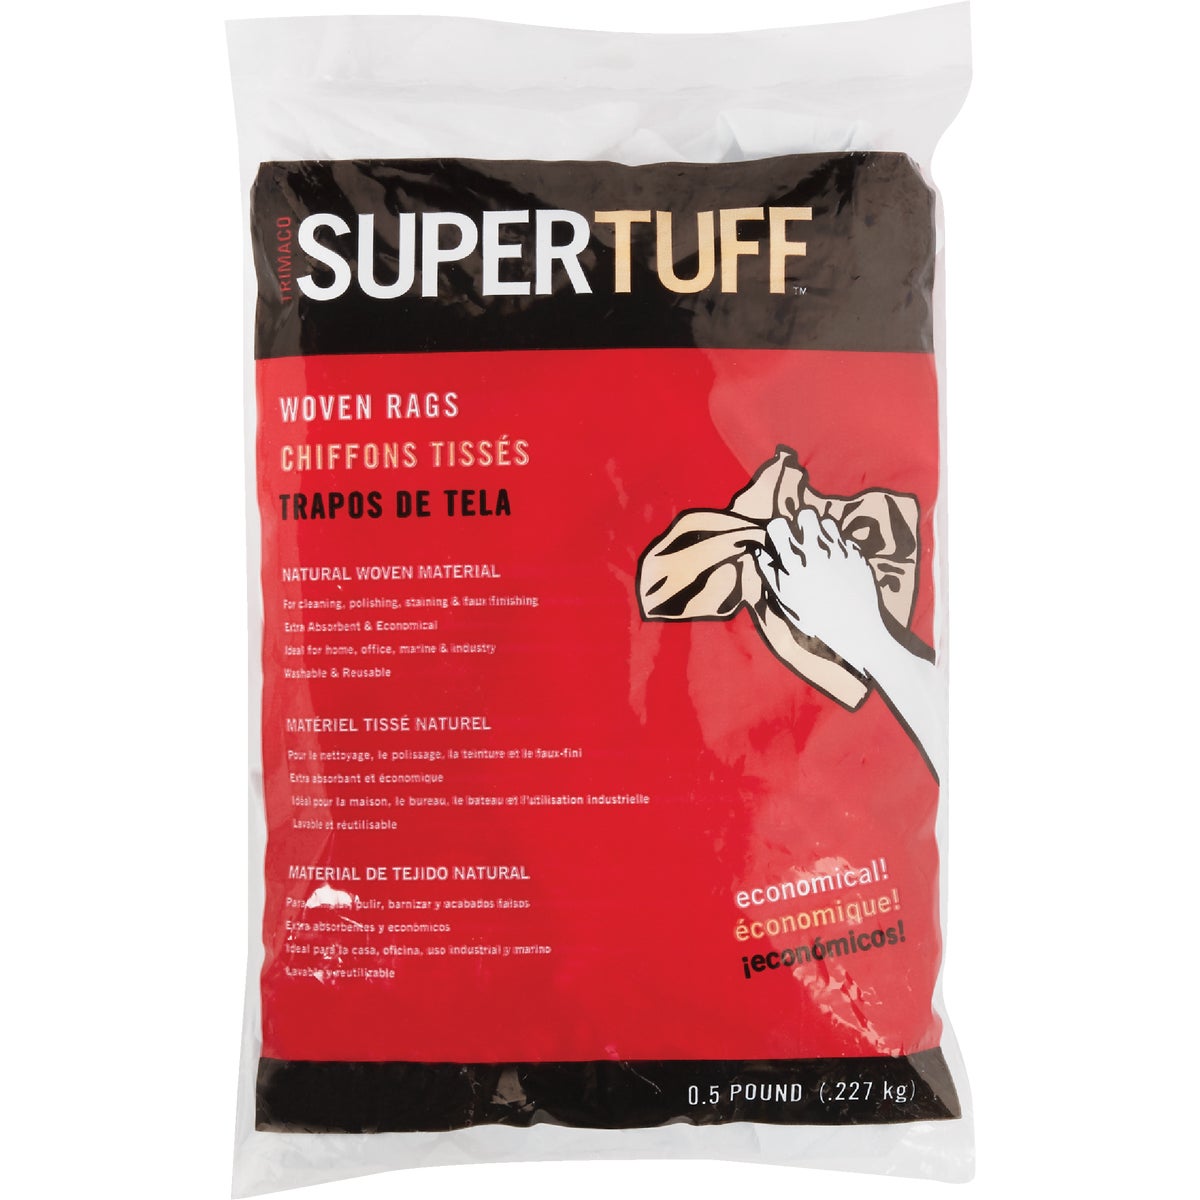 Item 793108, Trimaco's SuperTuff Painter's Rags are made from recycled remnants of 100% 